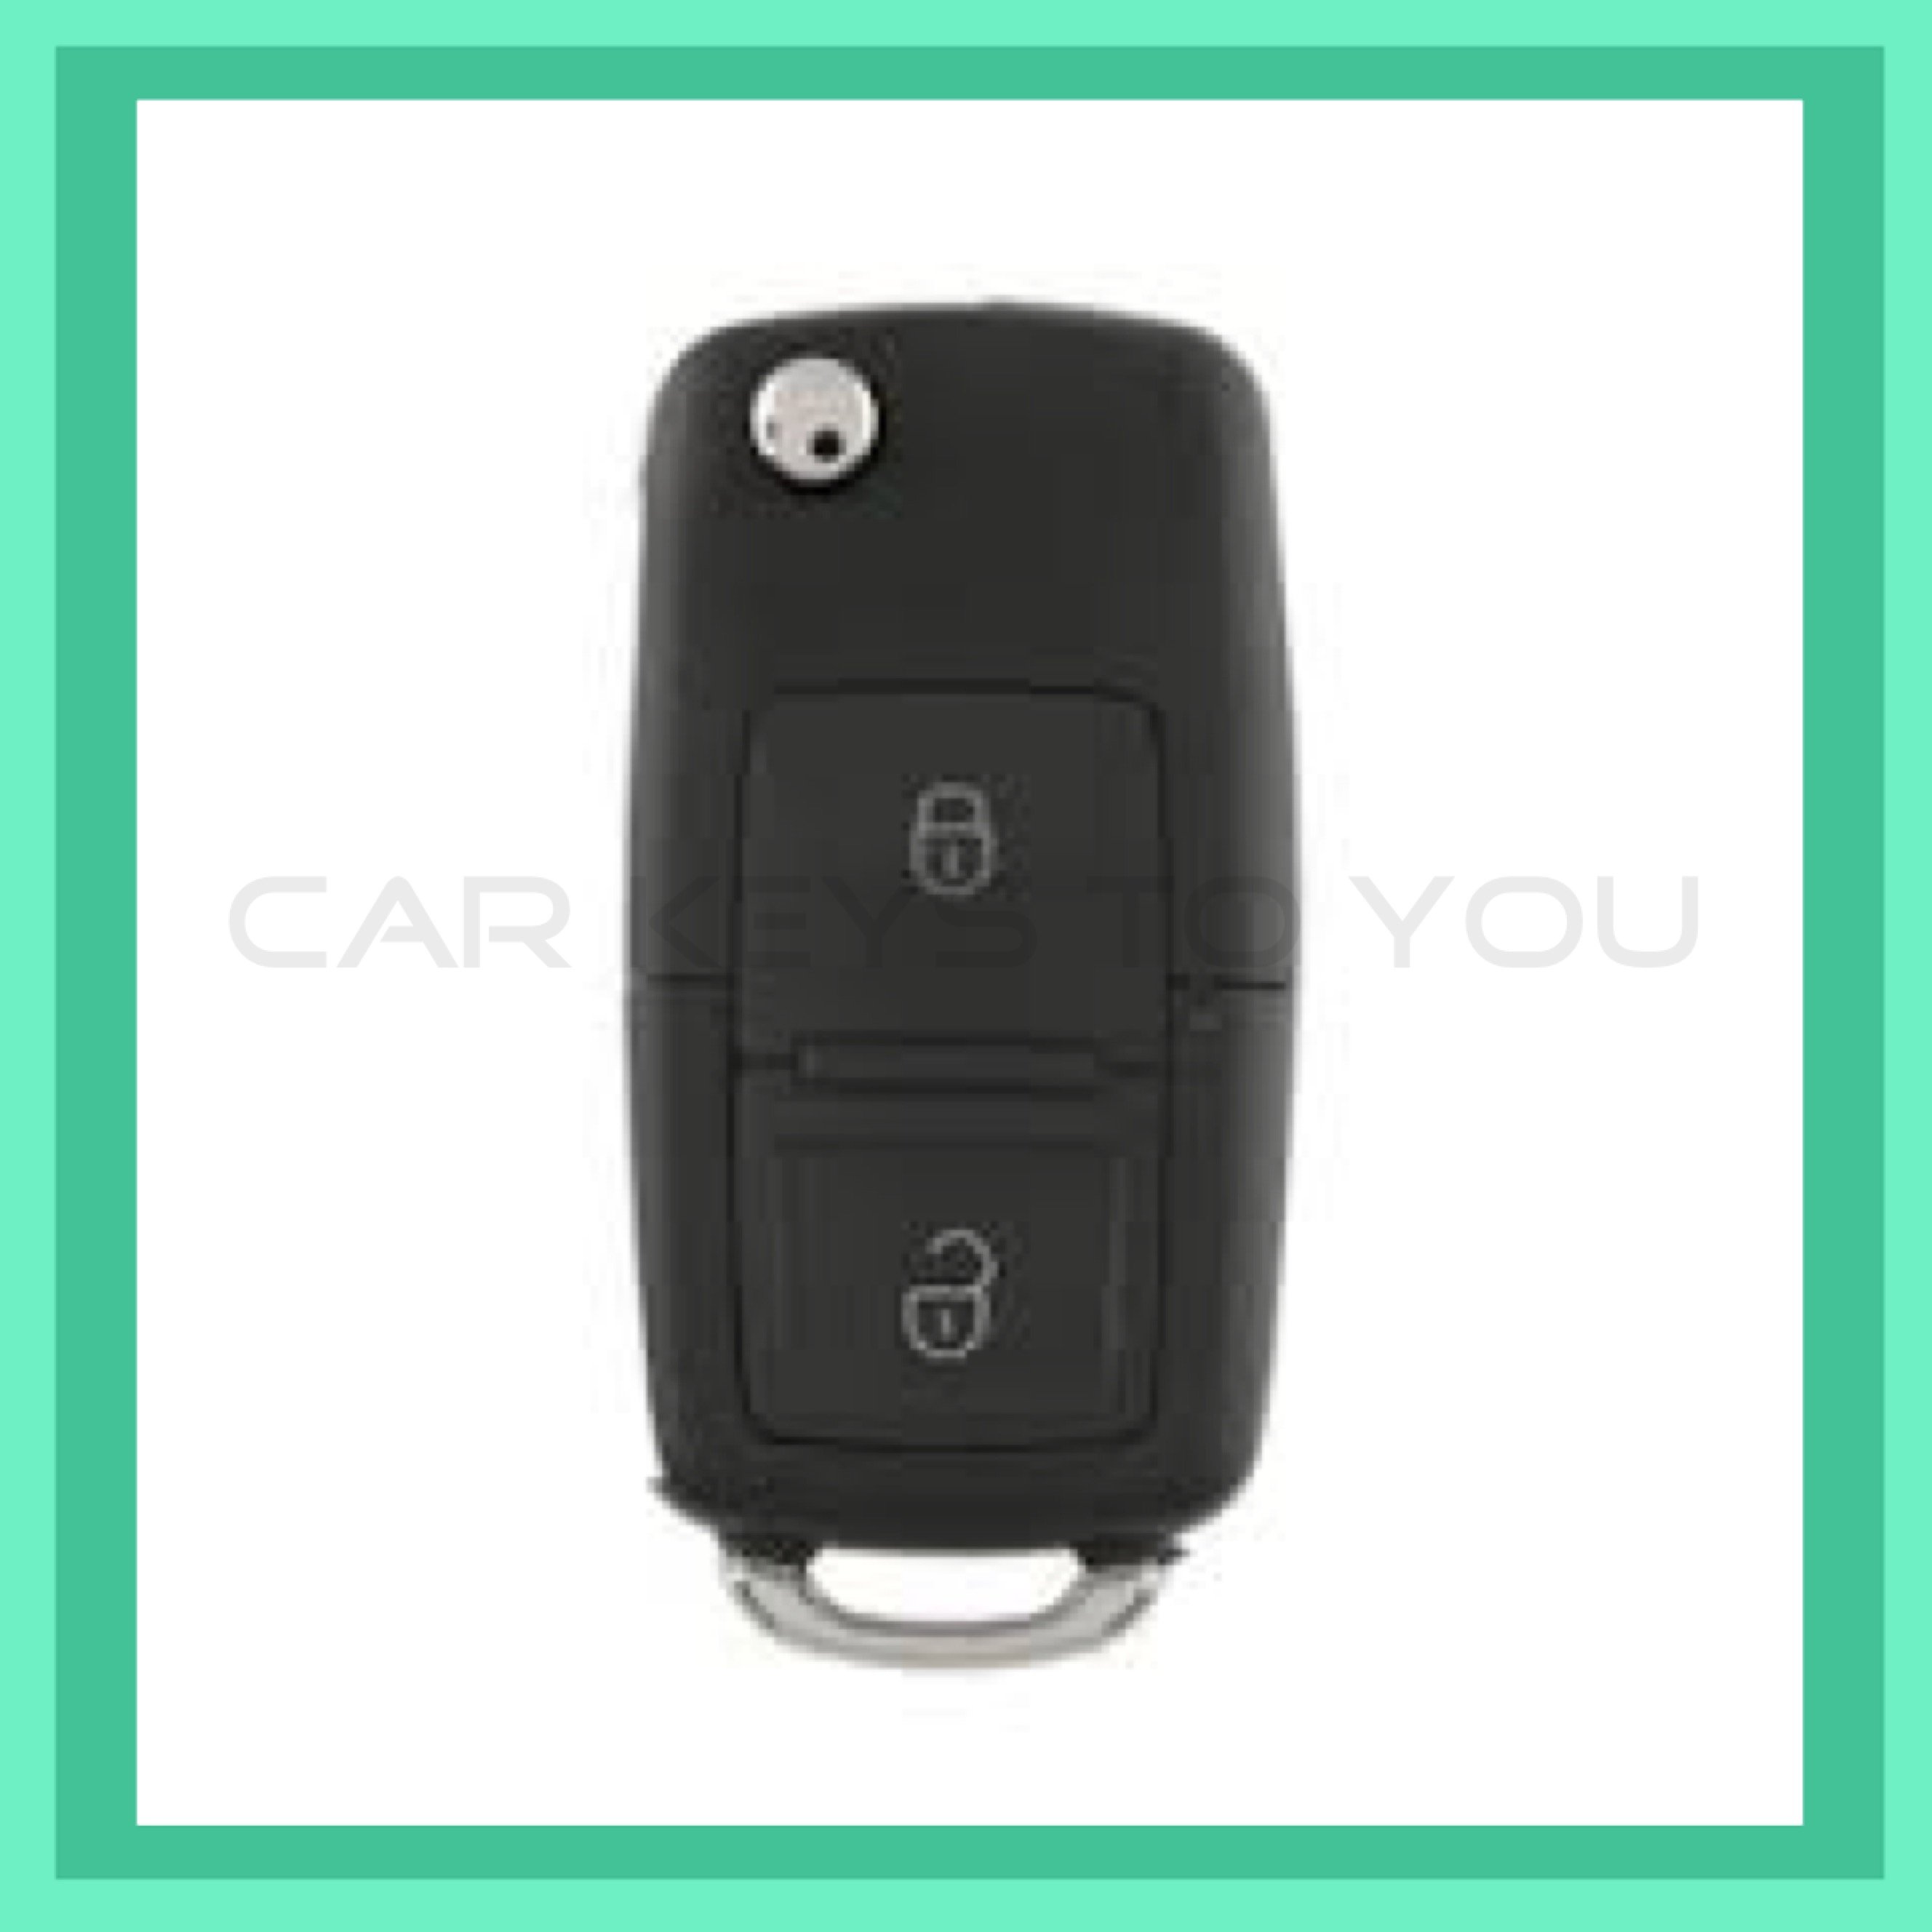 Toyota Rav 4 Car Key and Remote, Suit 2003 - 2005